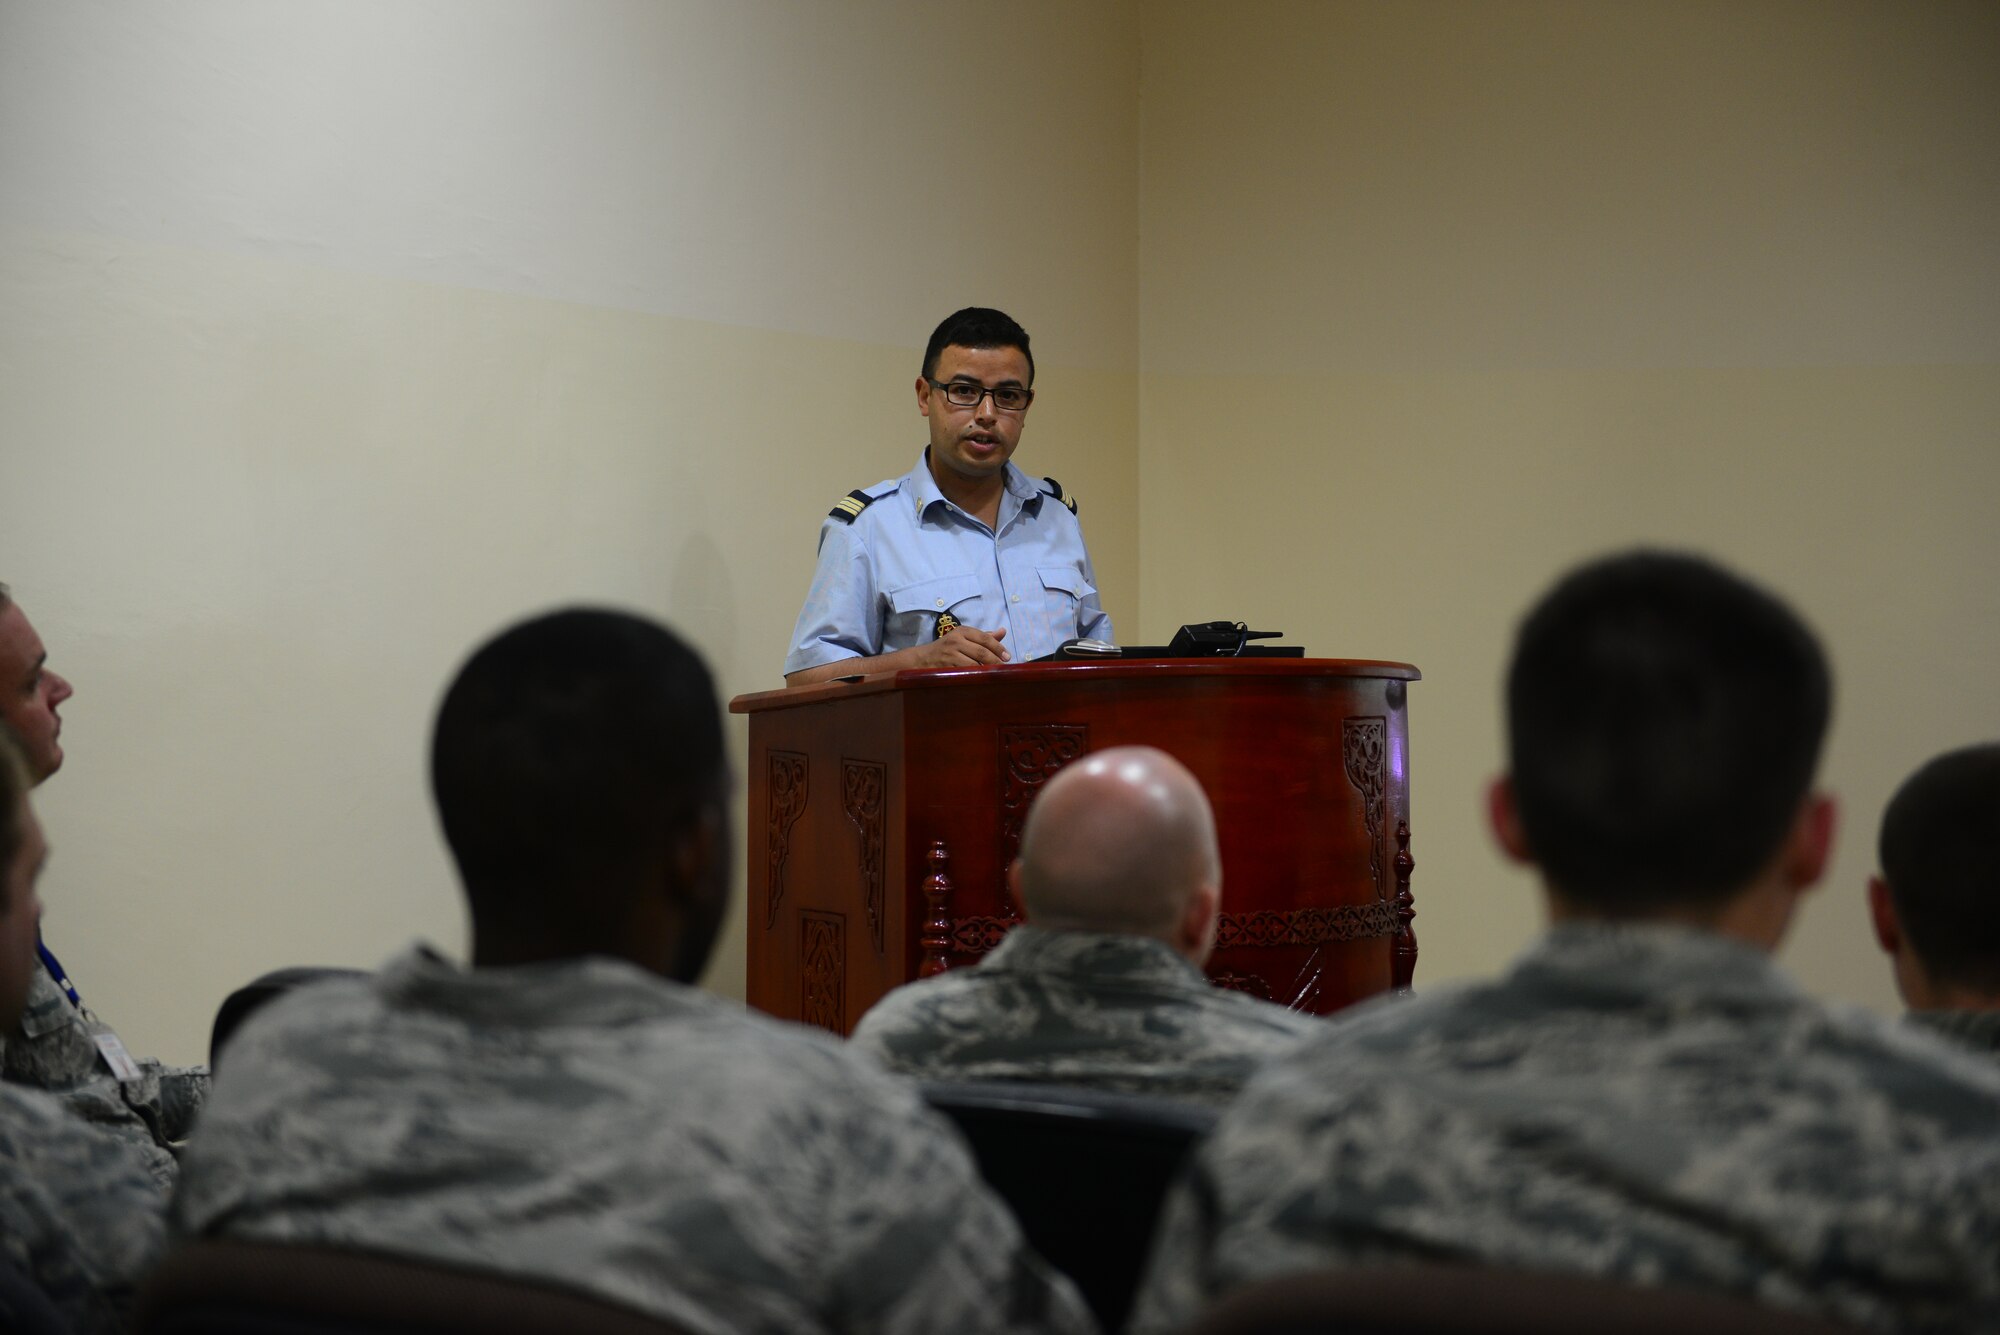 A Royal Moroccan Air Force officer teaches a history and cultural class to U.S. Air Force Airmen during Exercise African Lion at Ben Guerir Air Base, Morocco, May 19, 2015. This class included important events in RMAF history and lessons on cultural traditions and sensitivities. African Lion is a joint coalition exercise led by U.S. Marine Forces Europe and Africa with a mission of building partnerships and maximizing interoperability with allies. (U.S. Air Force photo by Staff Sgt. Eboni Reams/Released)